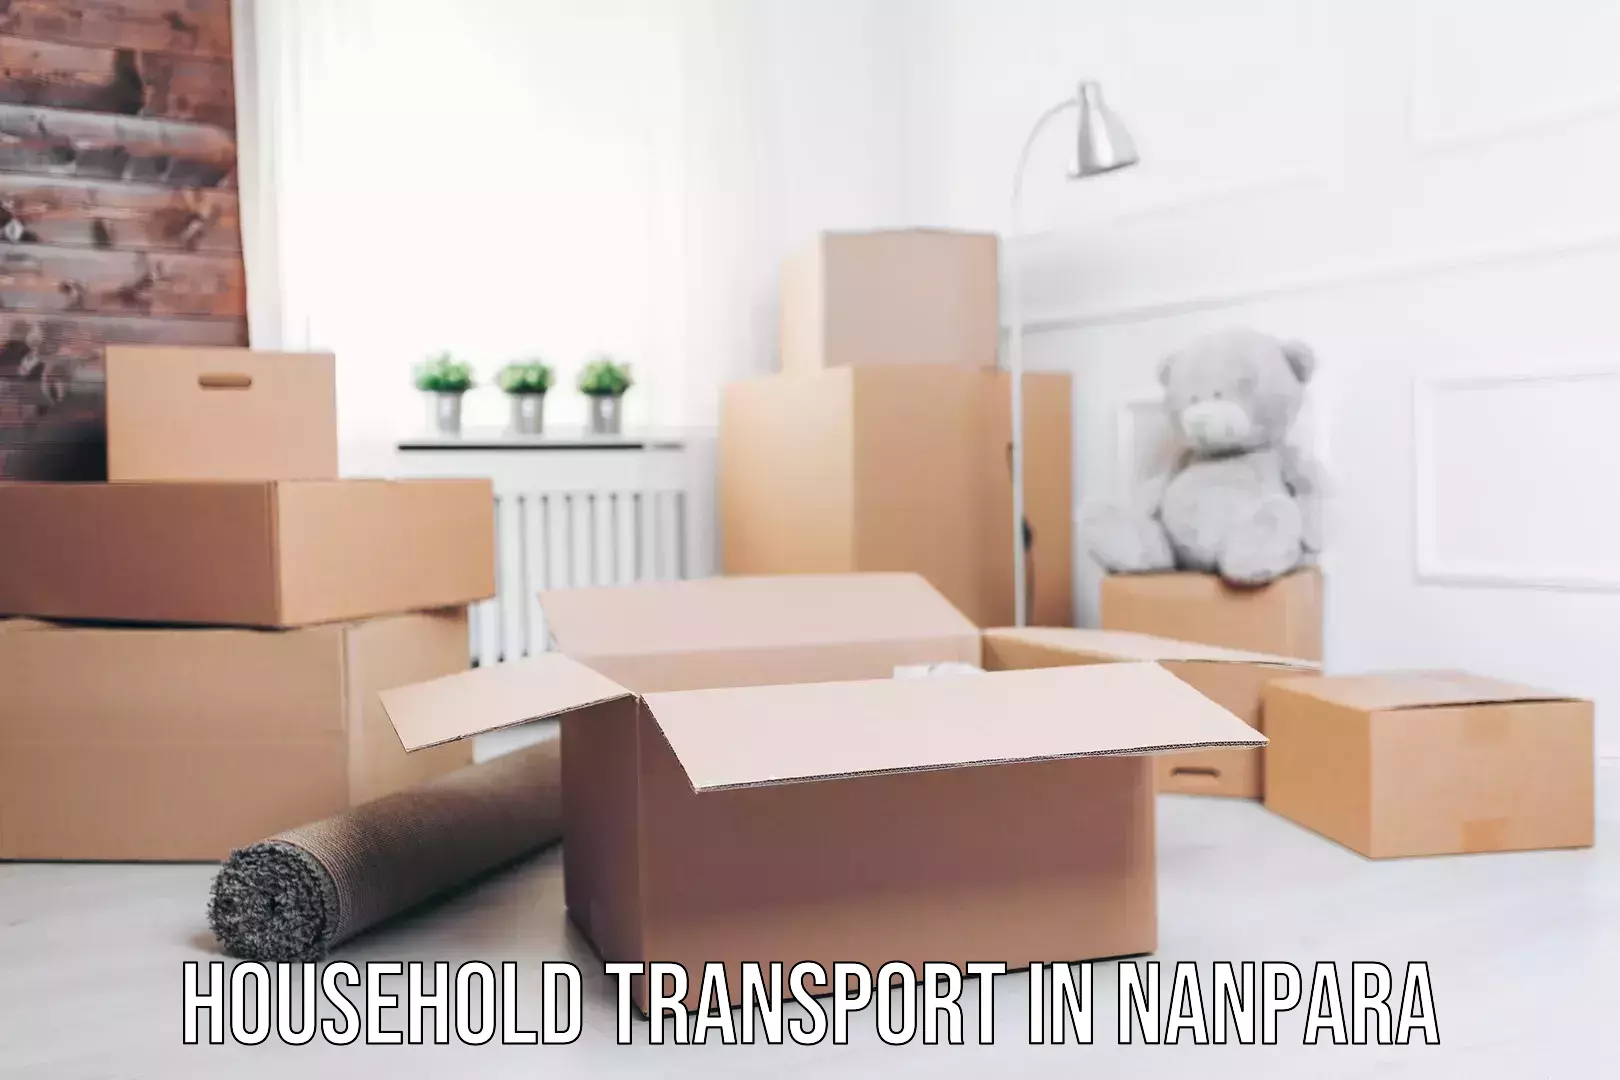 Household goods transporters in Nanpara